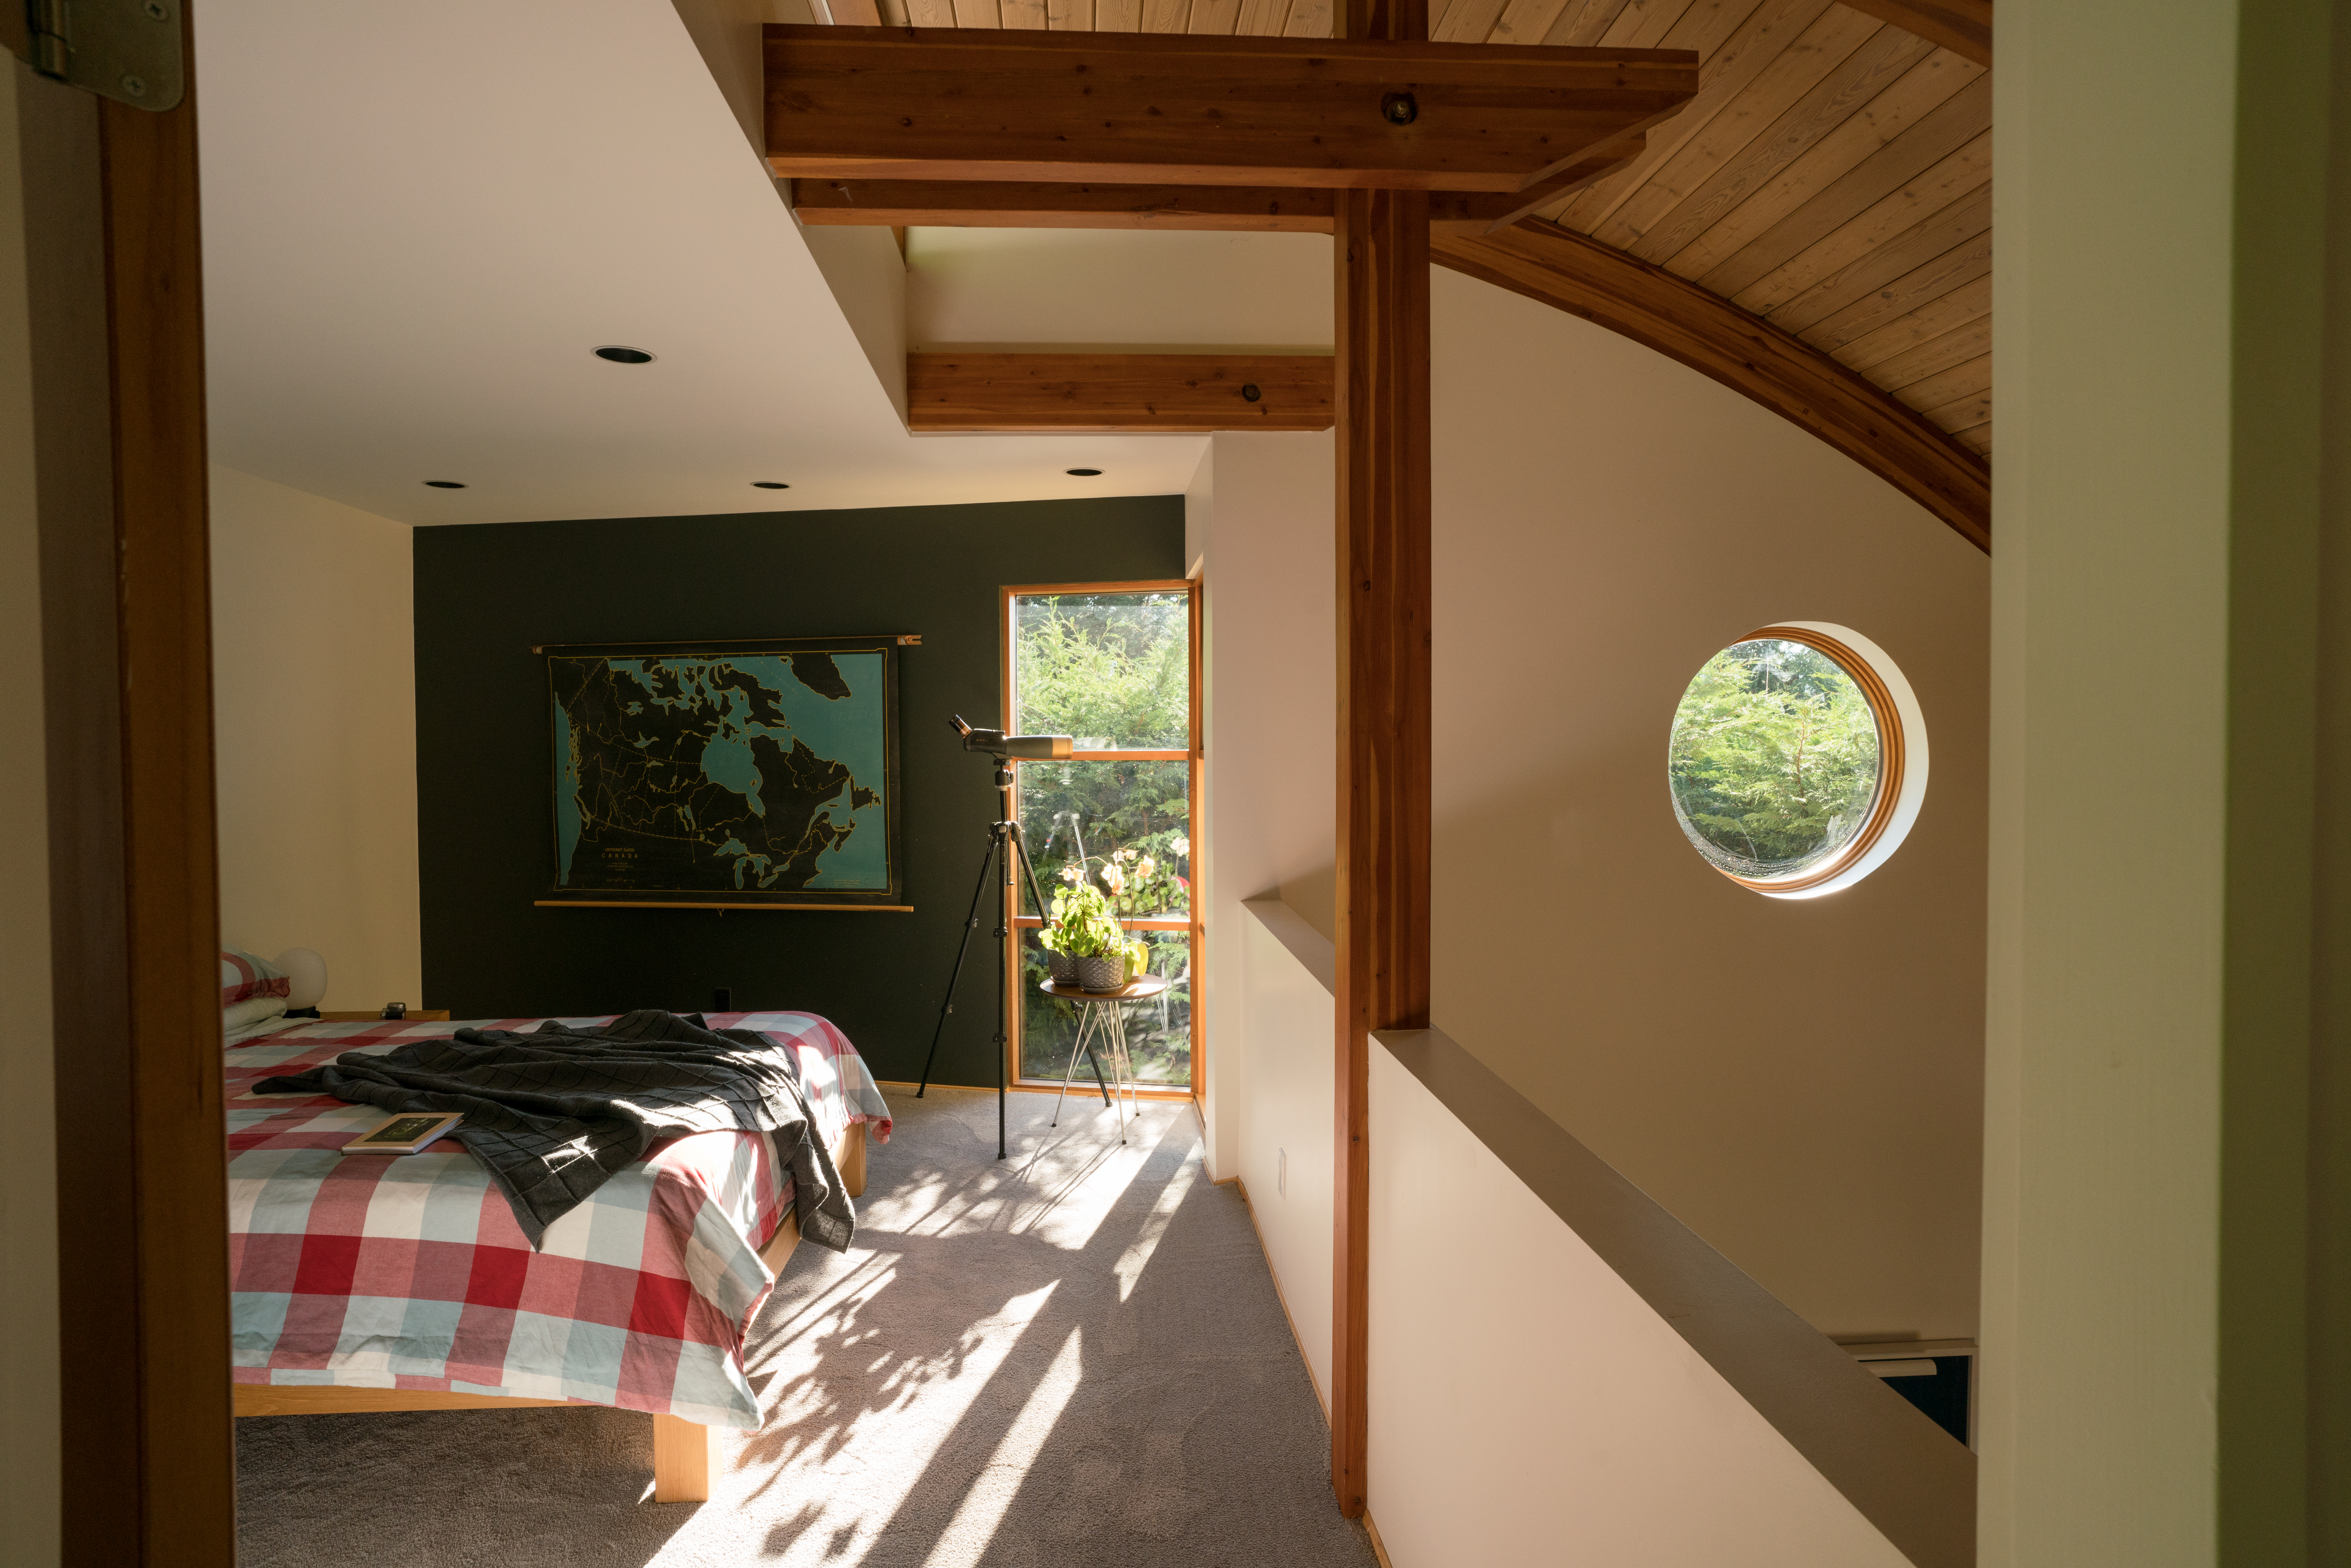 Bedroom design with wooden details at a custom home on Bowen Island.